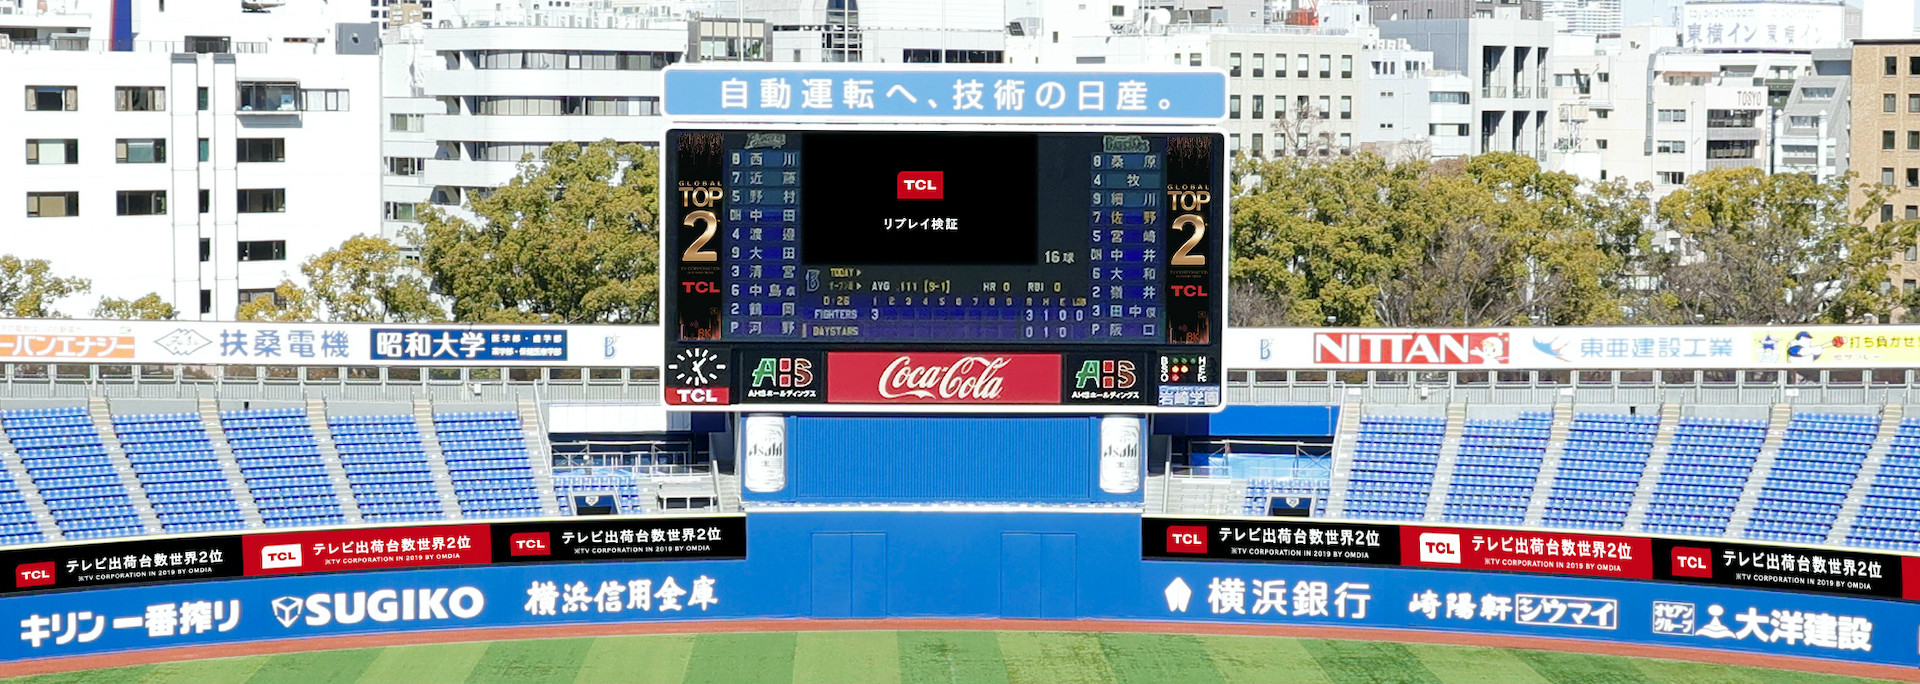 TCL replay verification ads during the baseball game